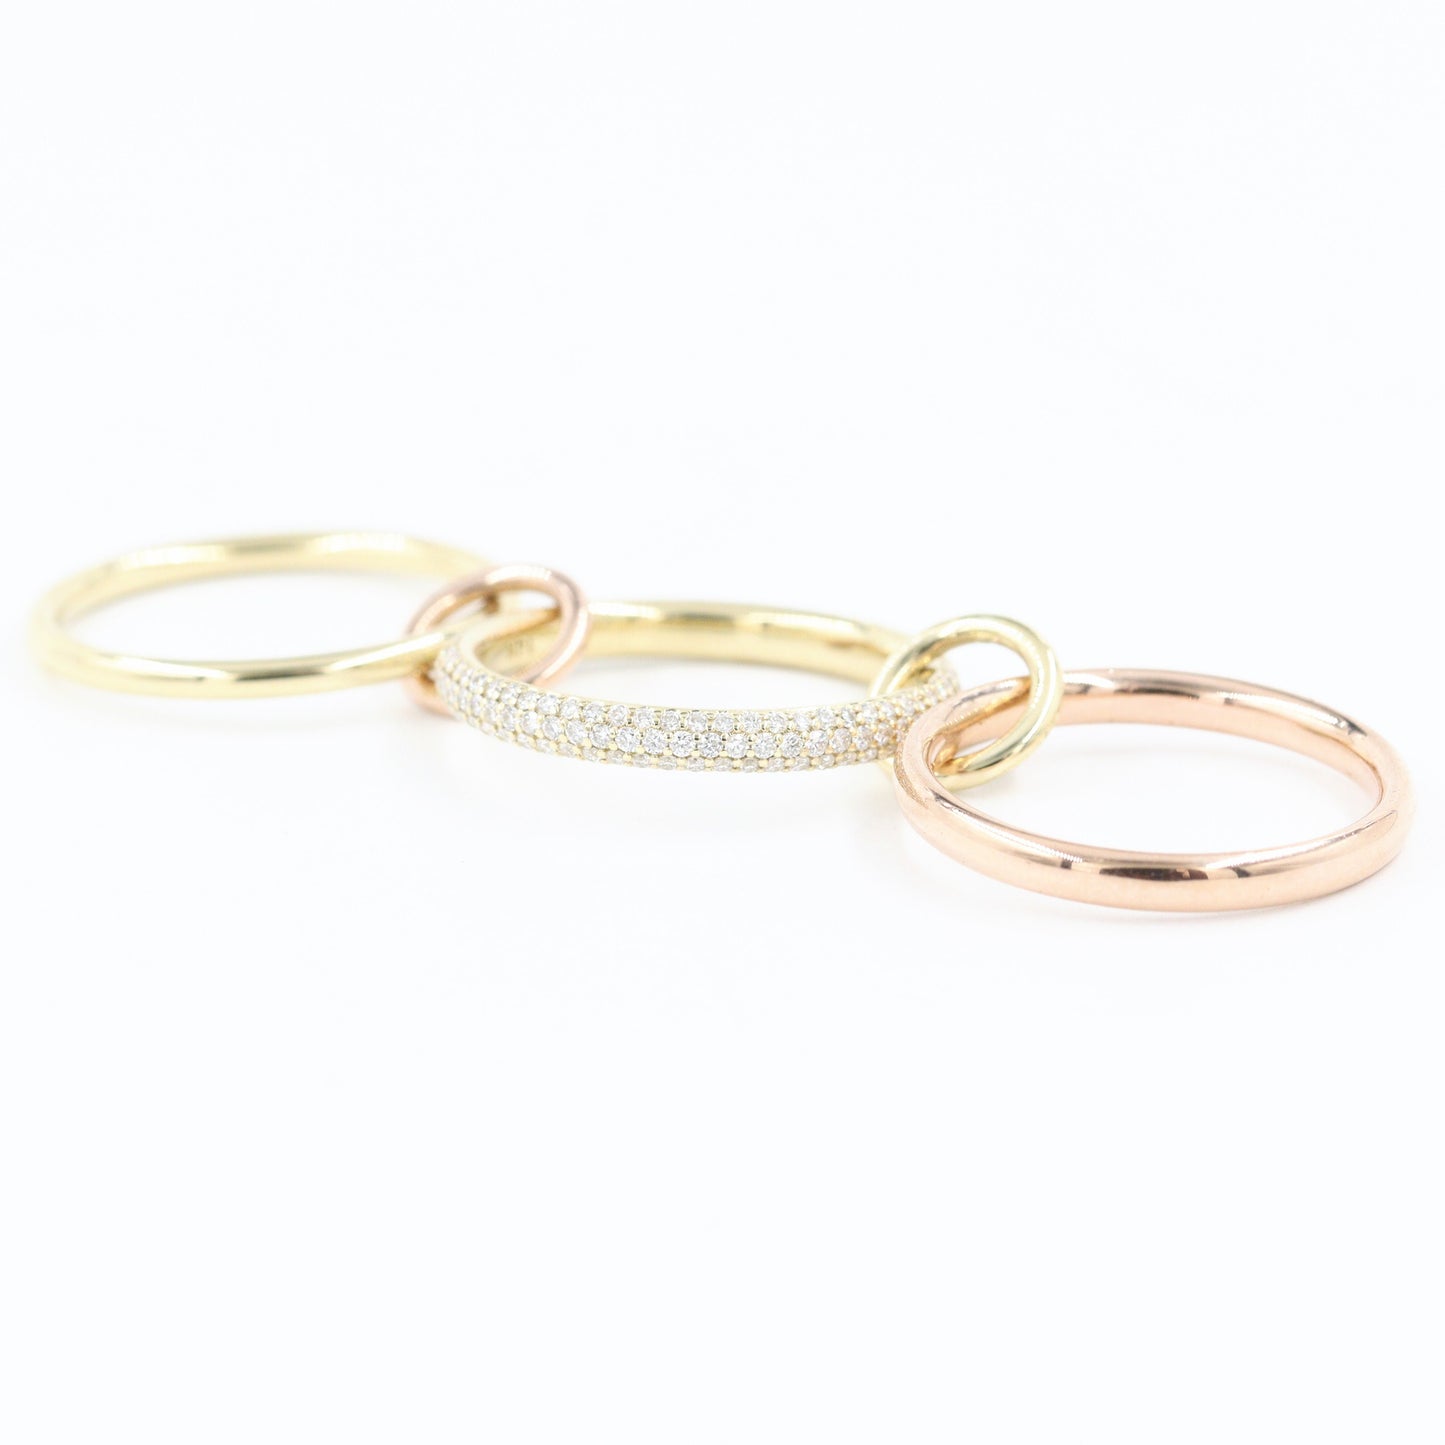 Stacking Rings with Connectors/Yellow Rose White gold 3 Bands with 2 connectors/2.6 mm Width Diamond Rings/Sean's Bundle of 3 Rings